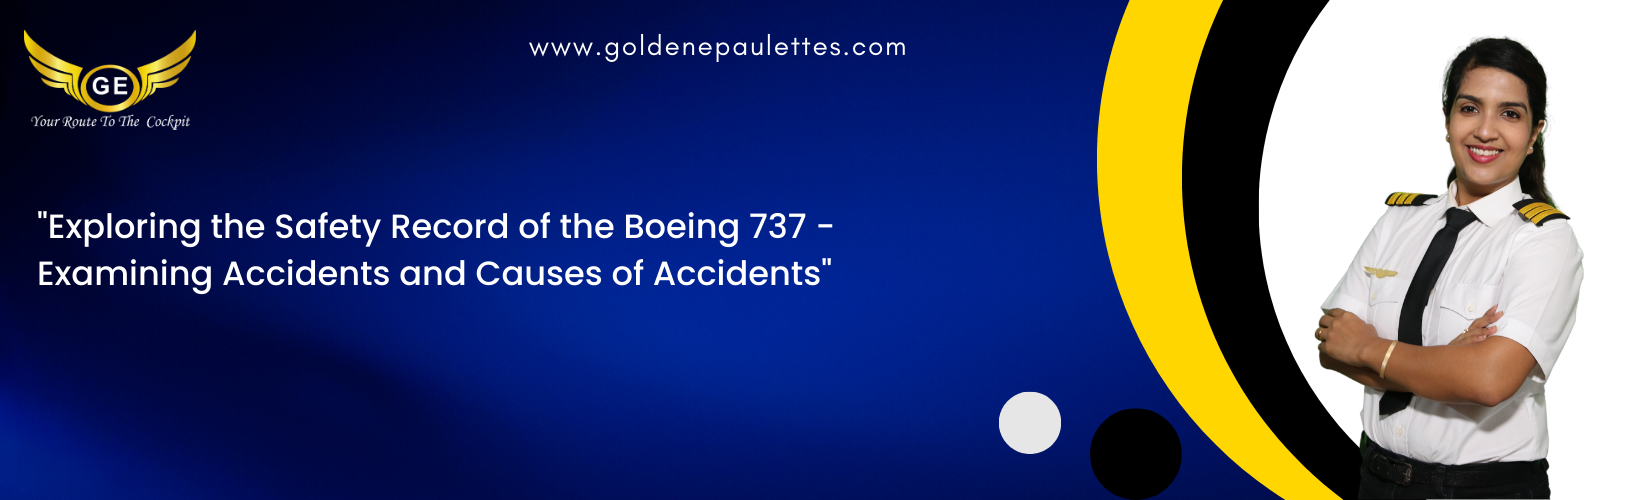 A Look at the Boeing 737's Safety Record